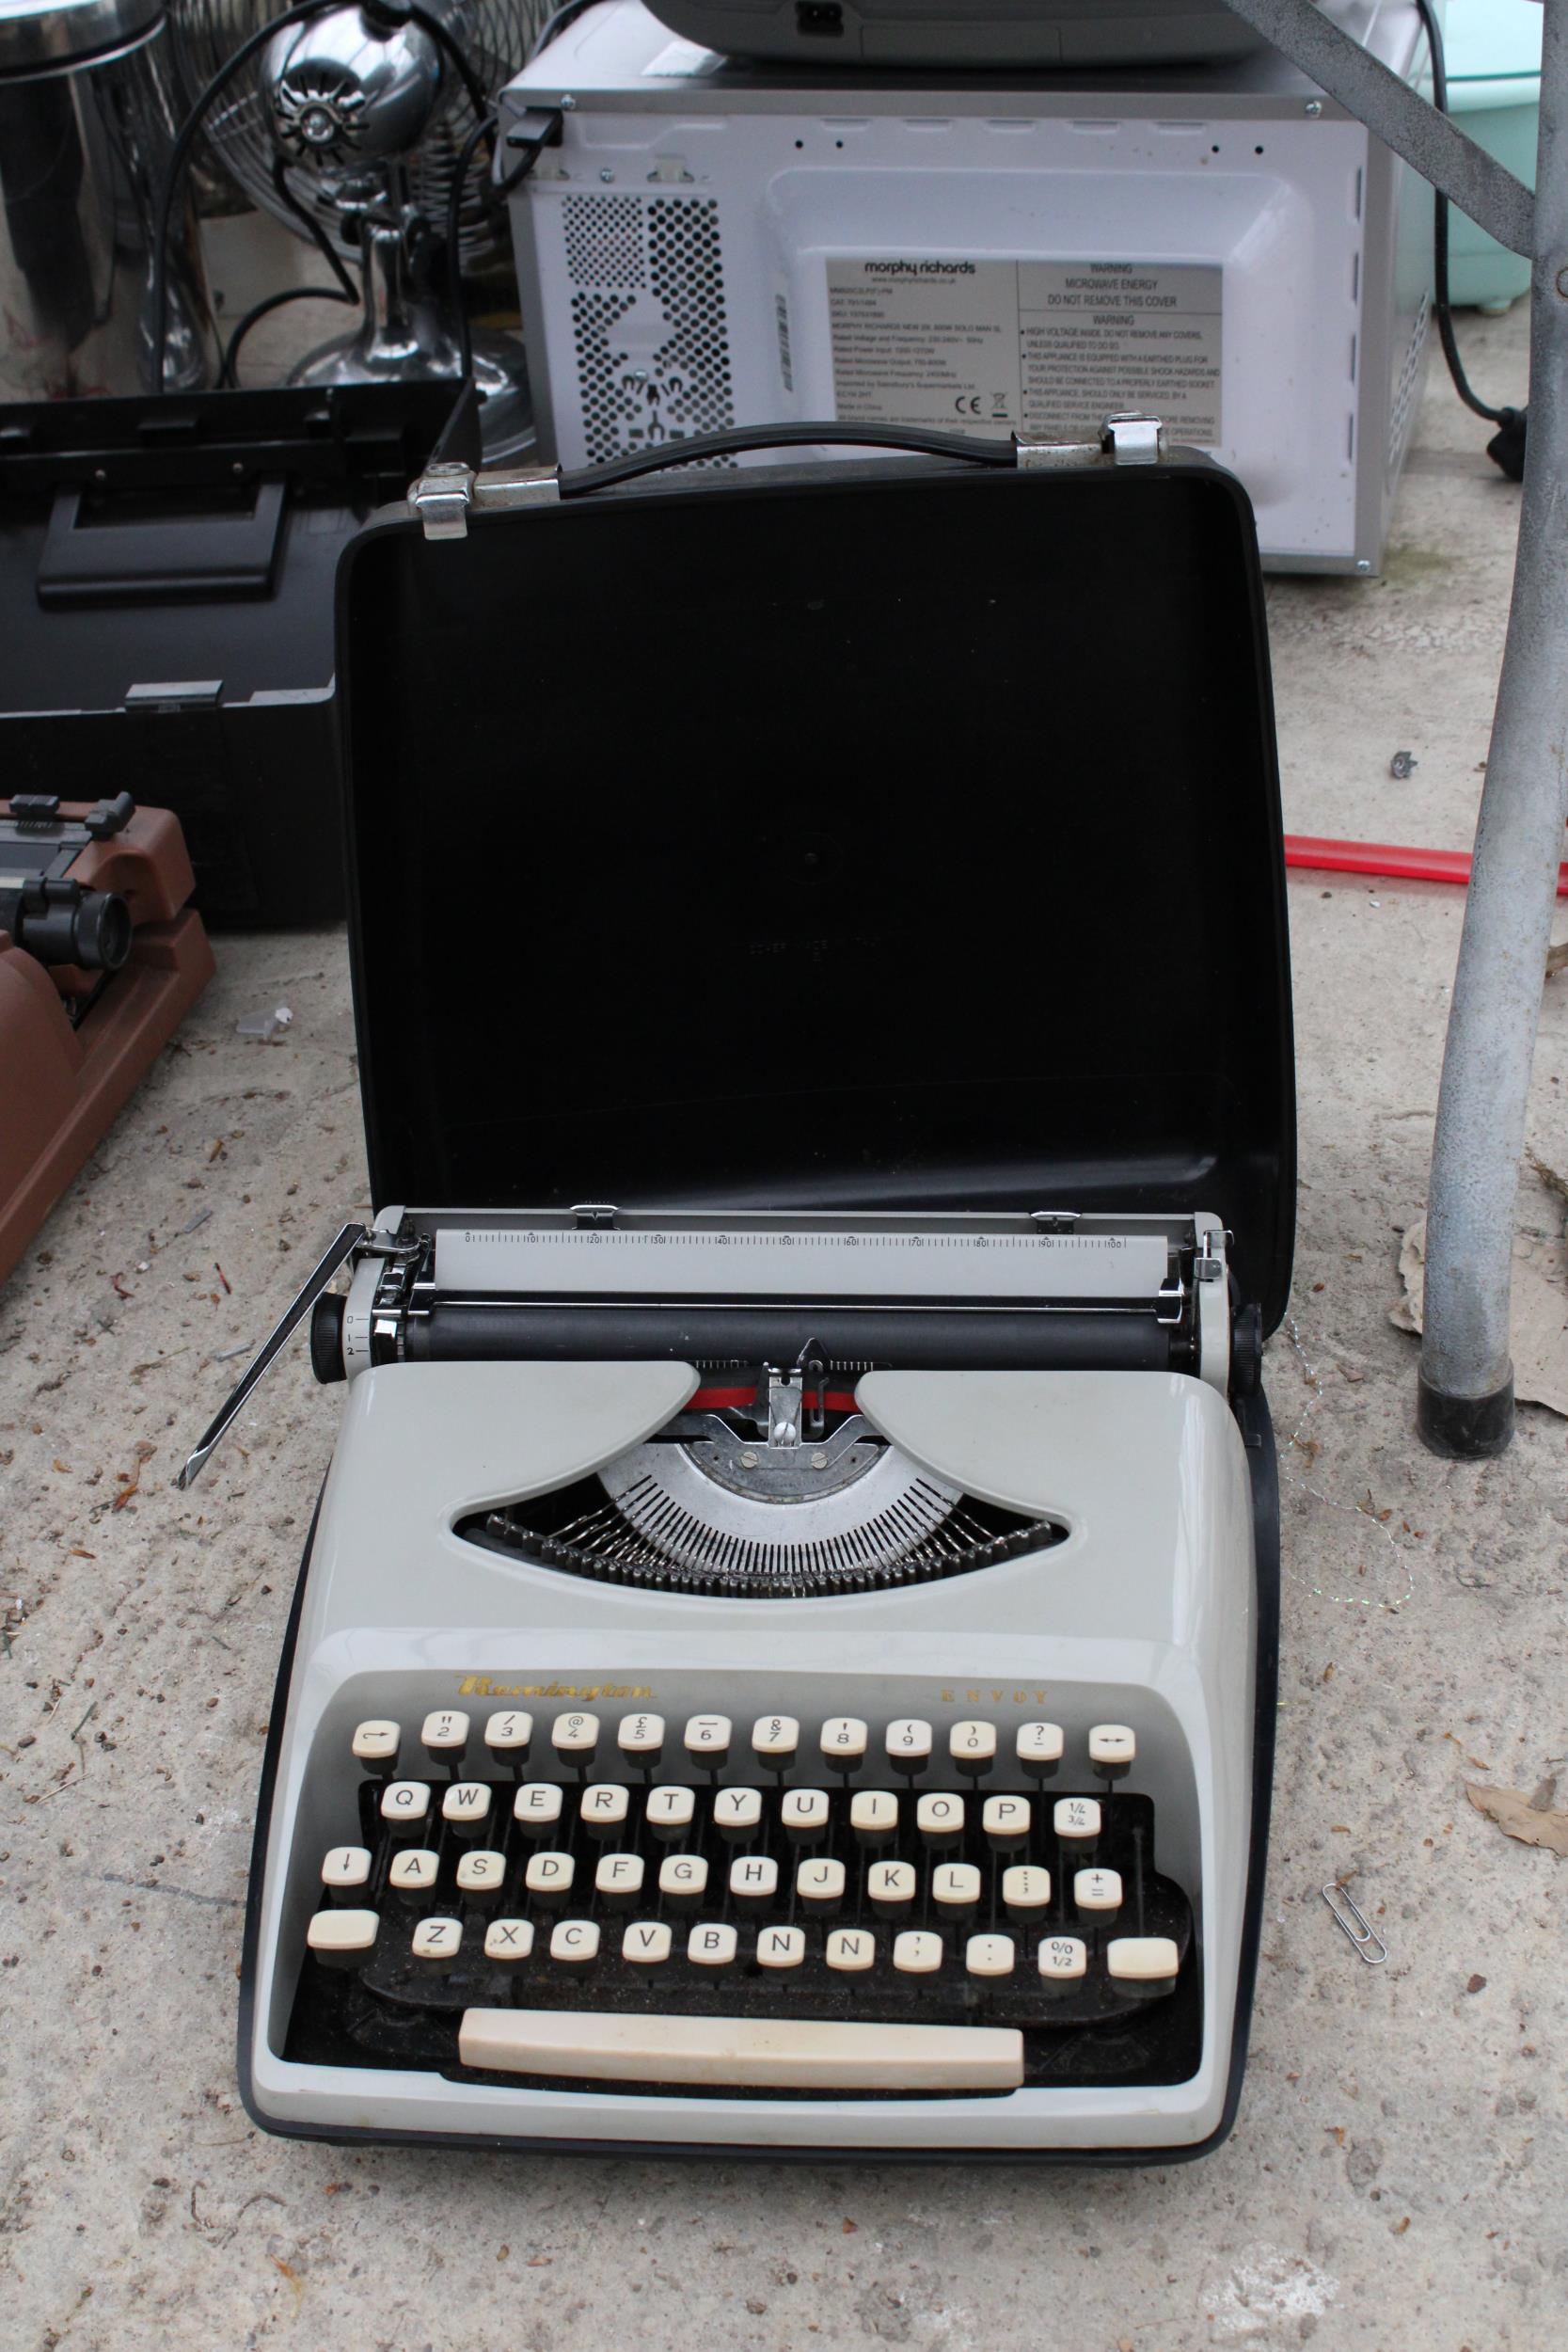 A VINTAGE REMMINGTON TYPEWRITER WITH CARRY CASE